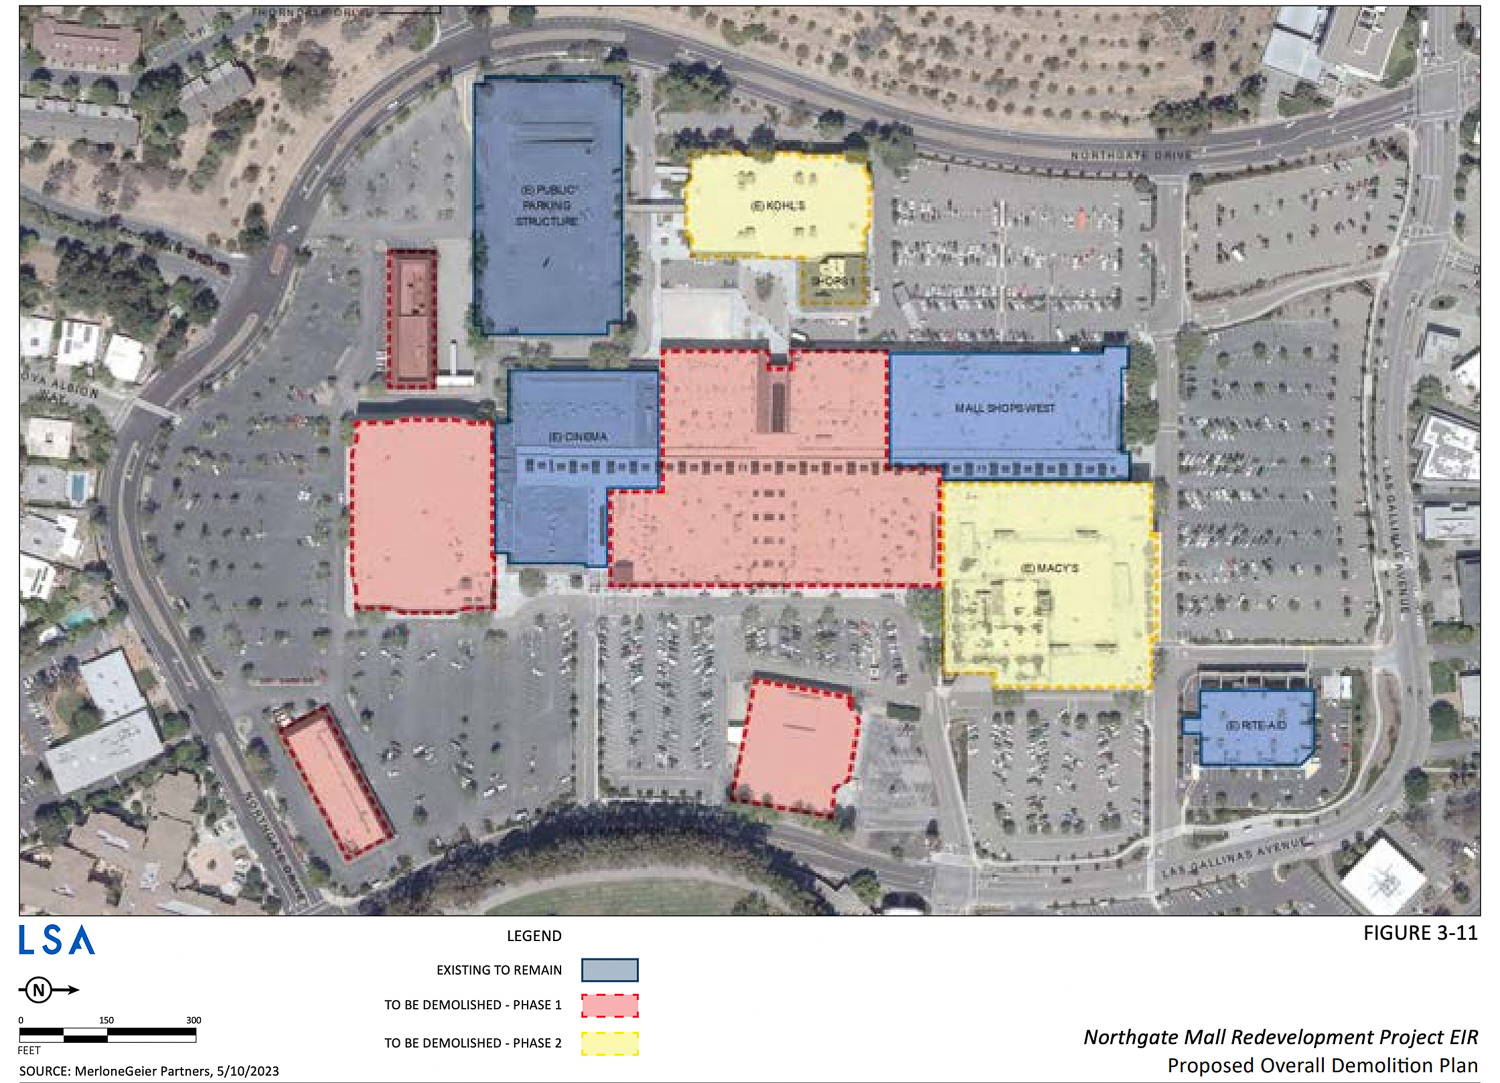 Northgate Mall Redevelopment site map showing which buildings will be demolished (red and yellow) and which buildings will remain (blue), illustration by Merlone Geier Partners